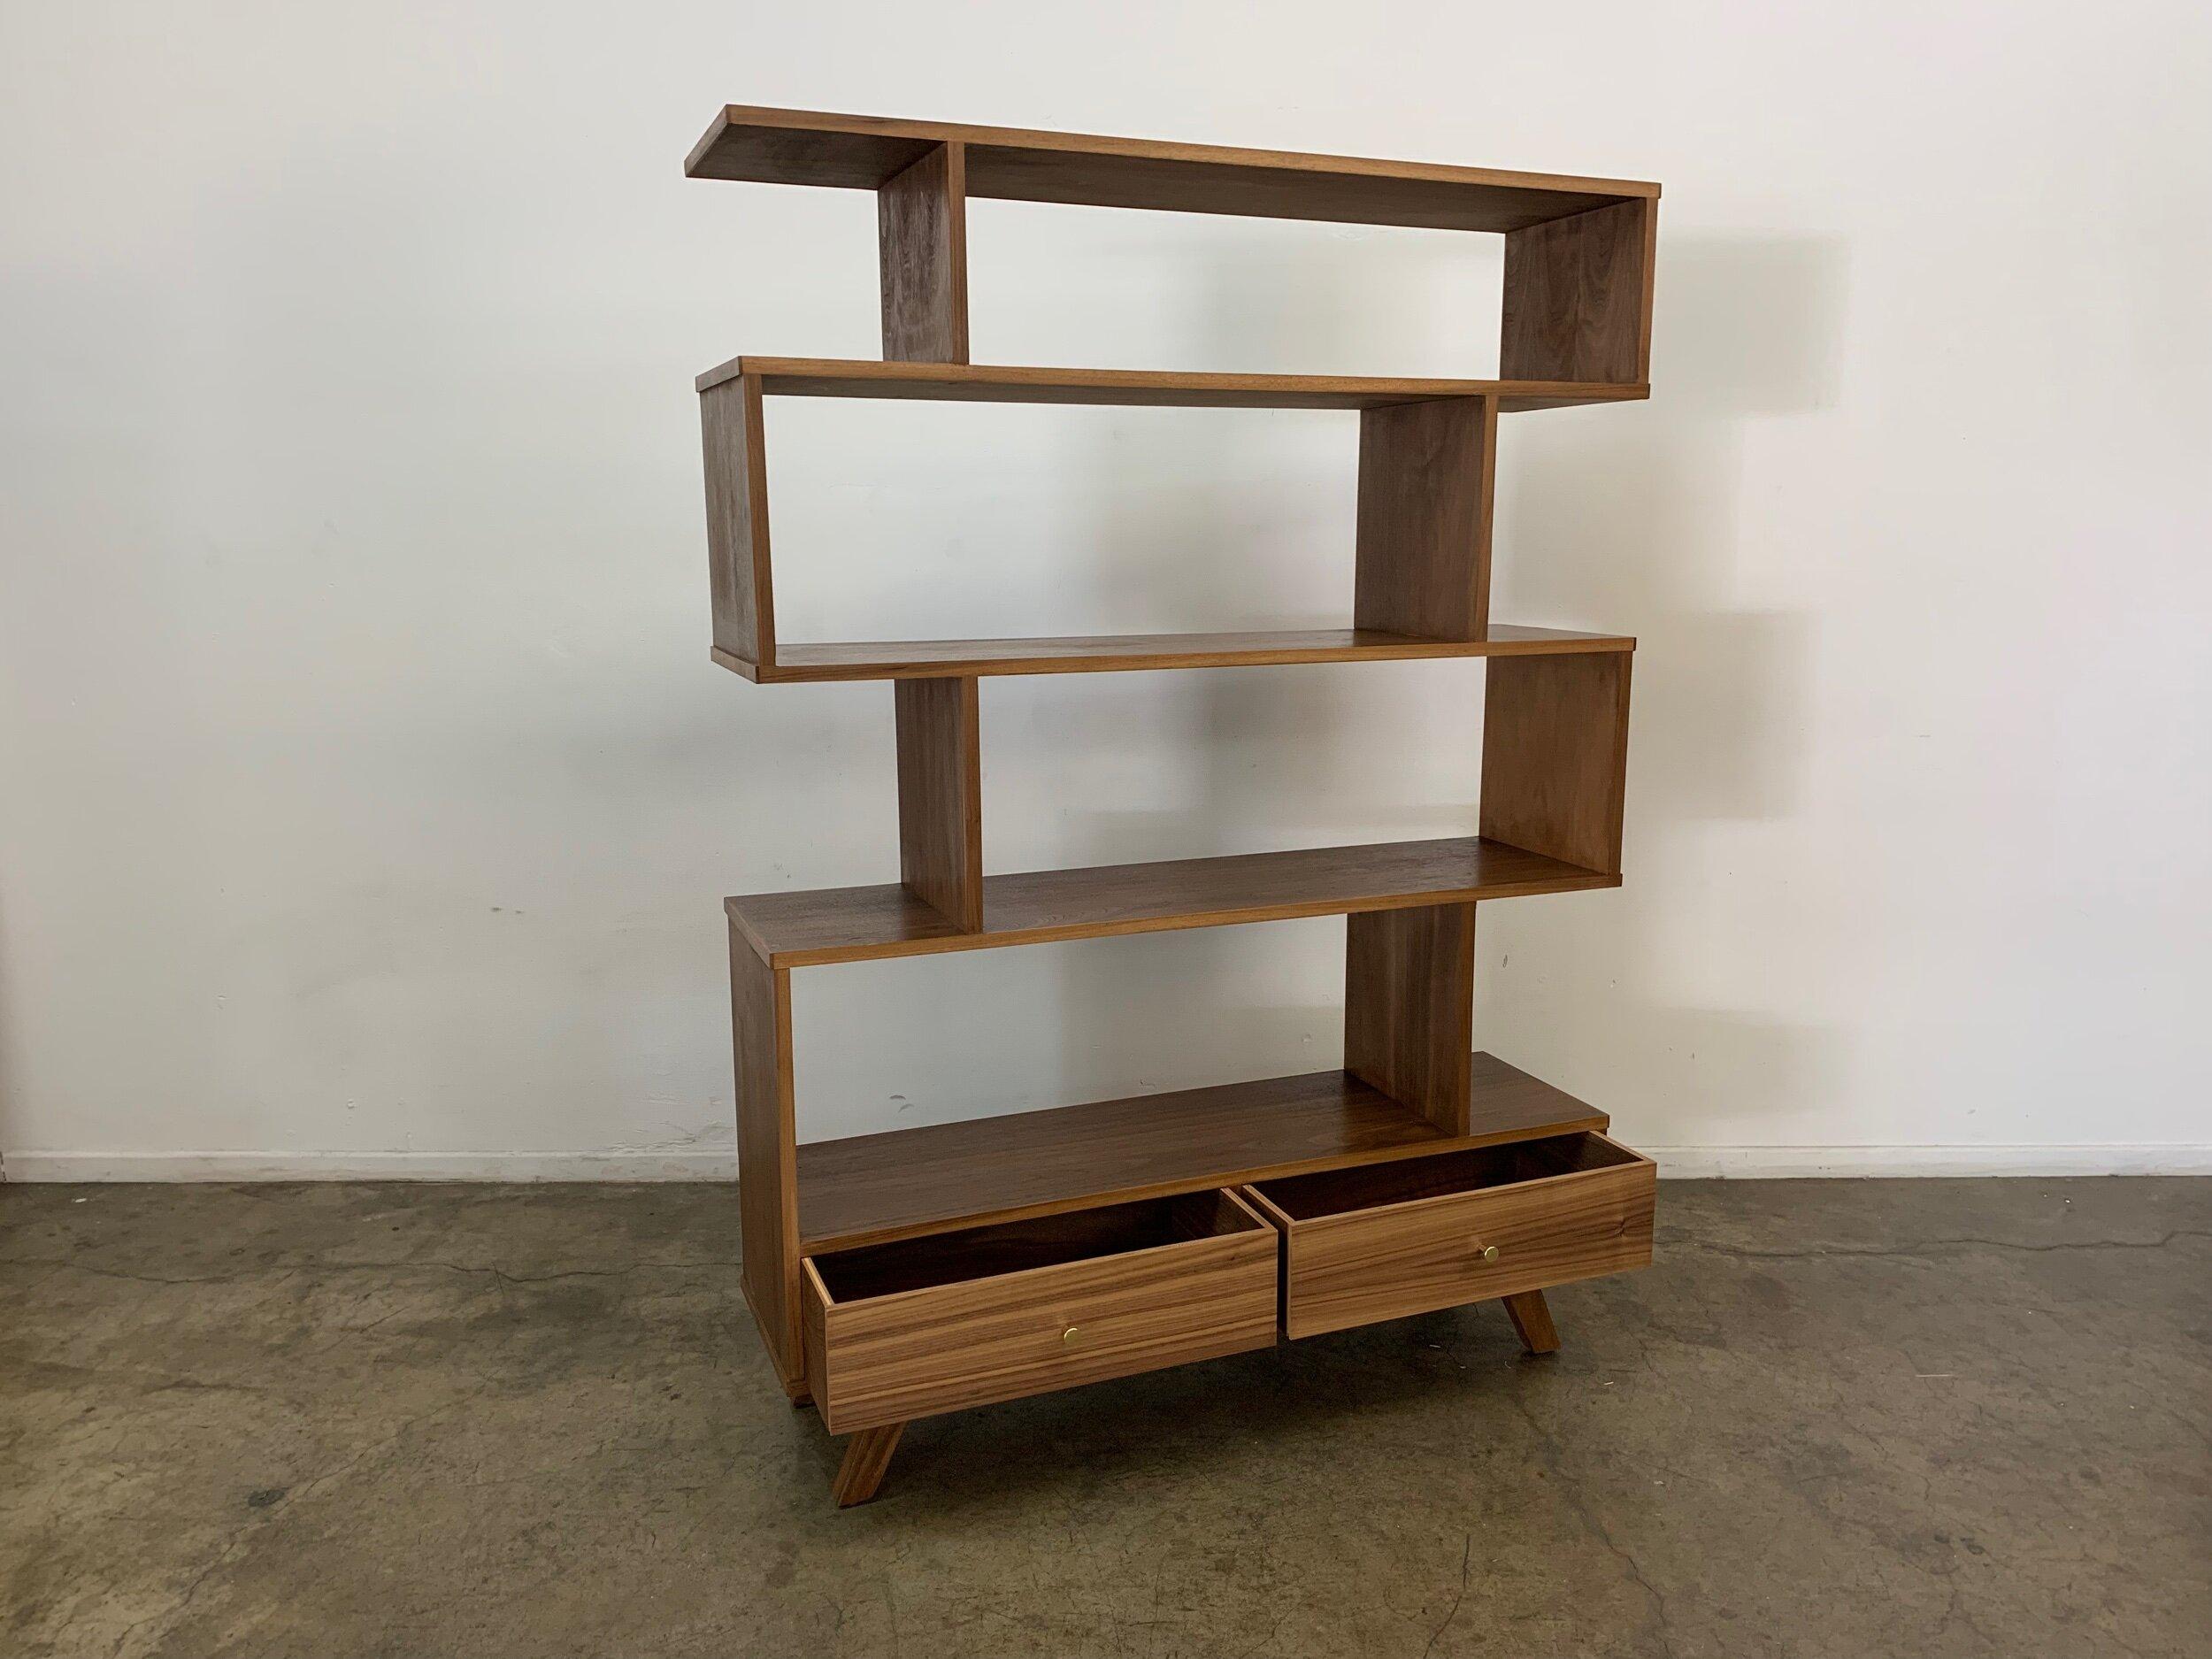 Contemporary Staggered Bookcase in Walnut -double closed- Floor model in San Francisco For Sale